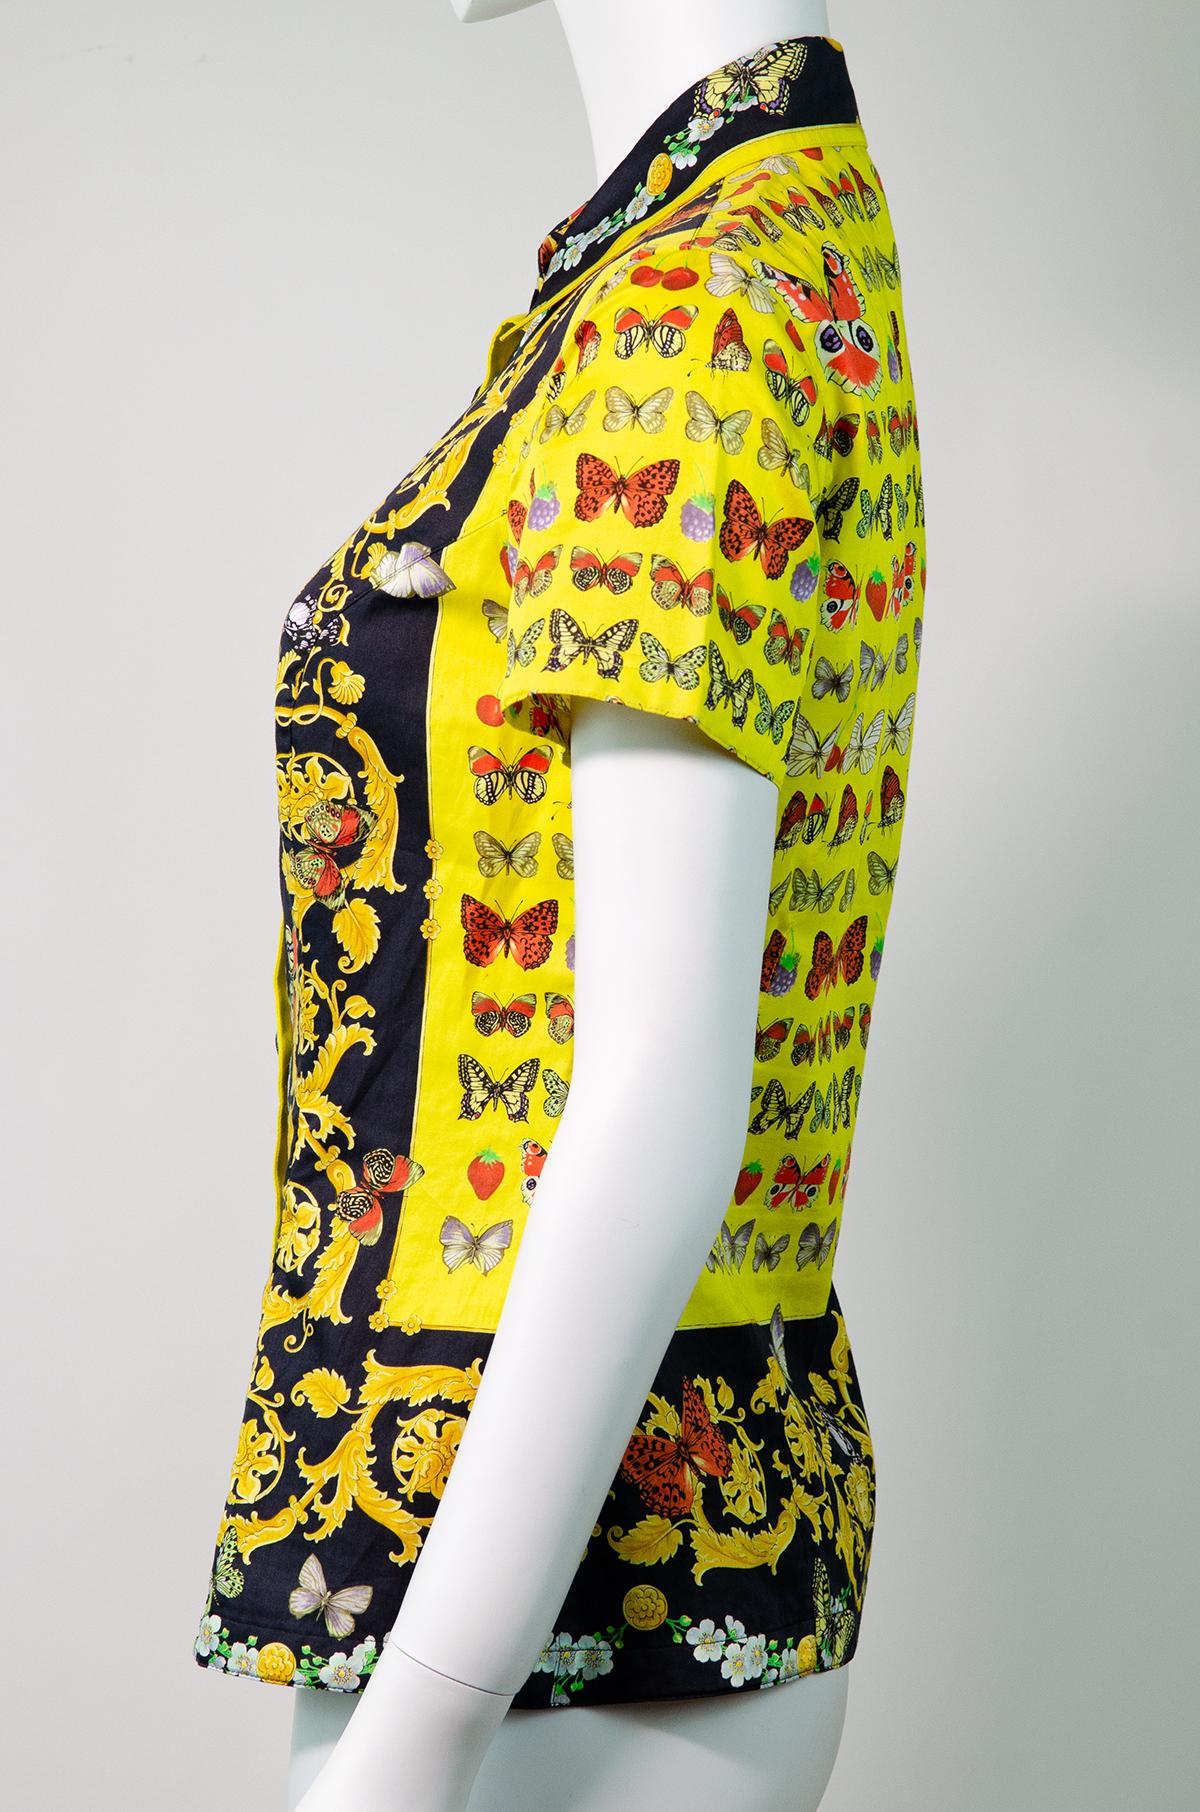 VERSACE S/S 1995 Vintage Iconic Butterfly Print Shirt In Excellent Condition For Sale In Berlin, BE